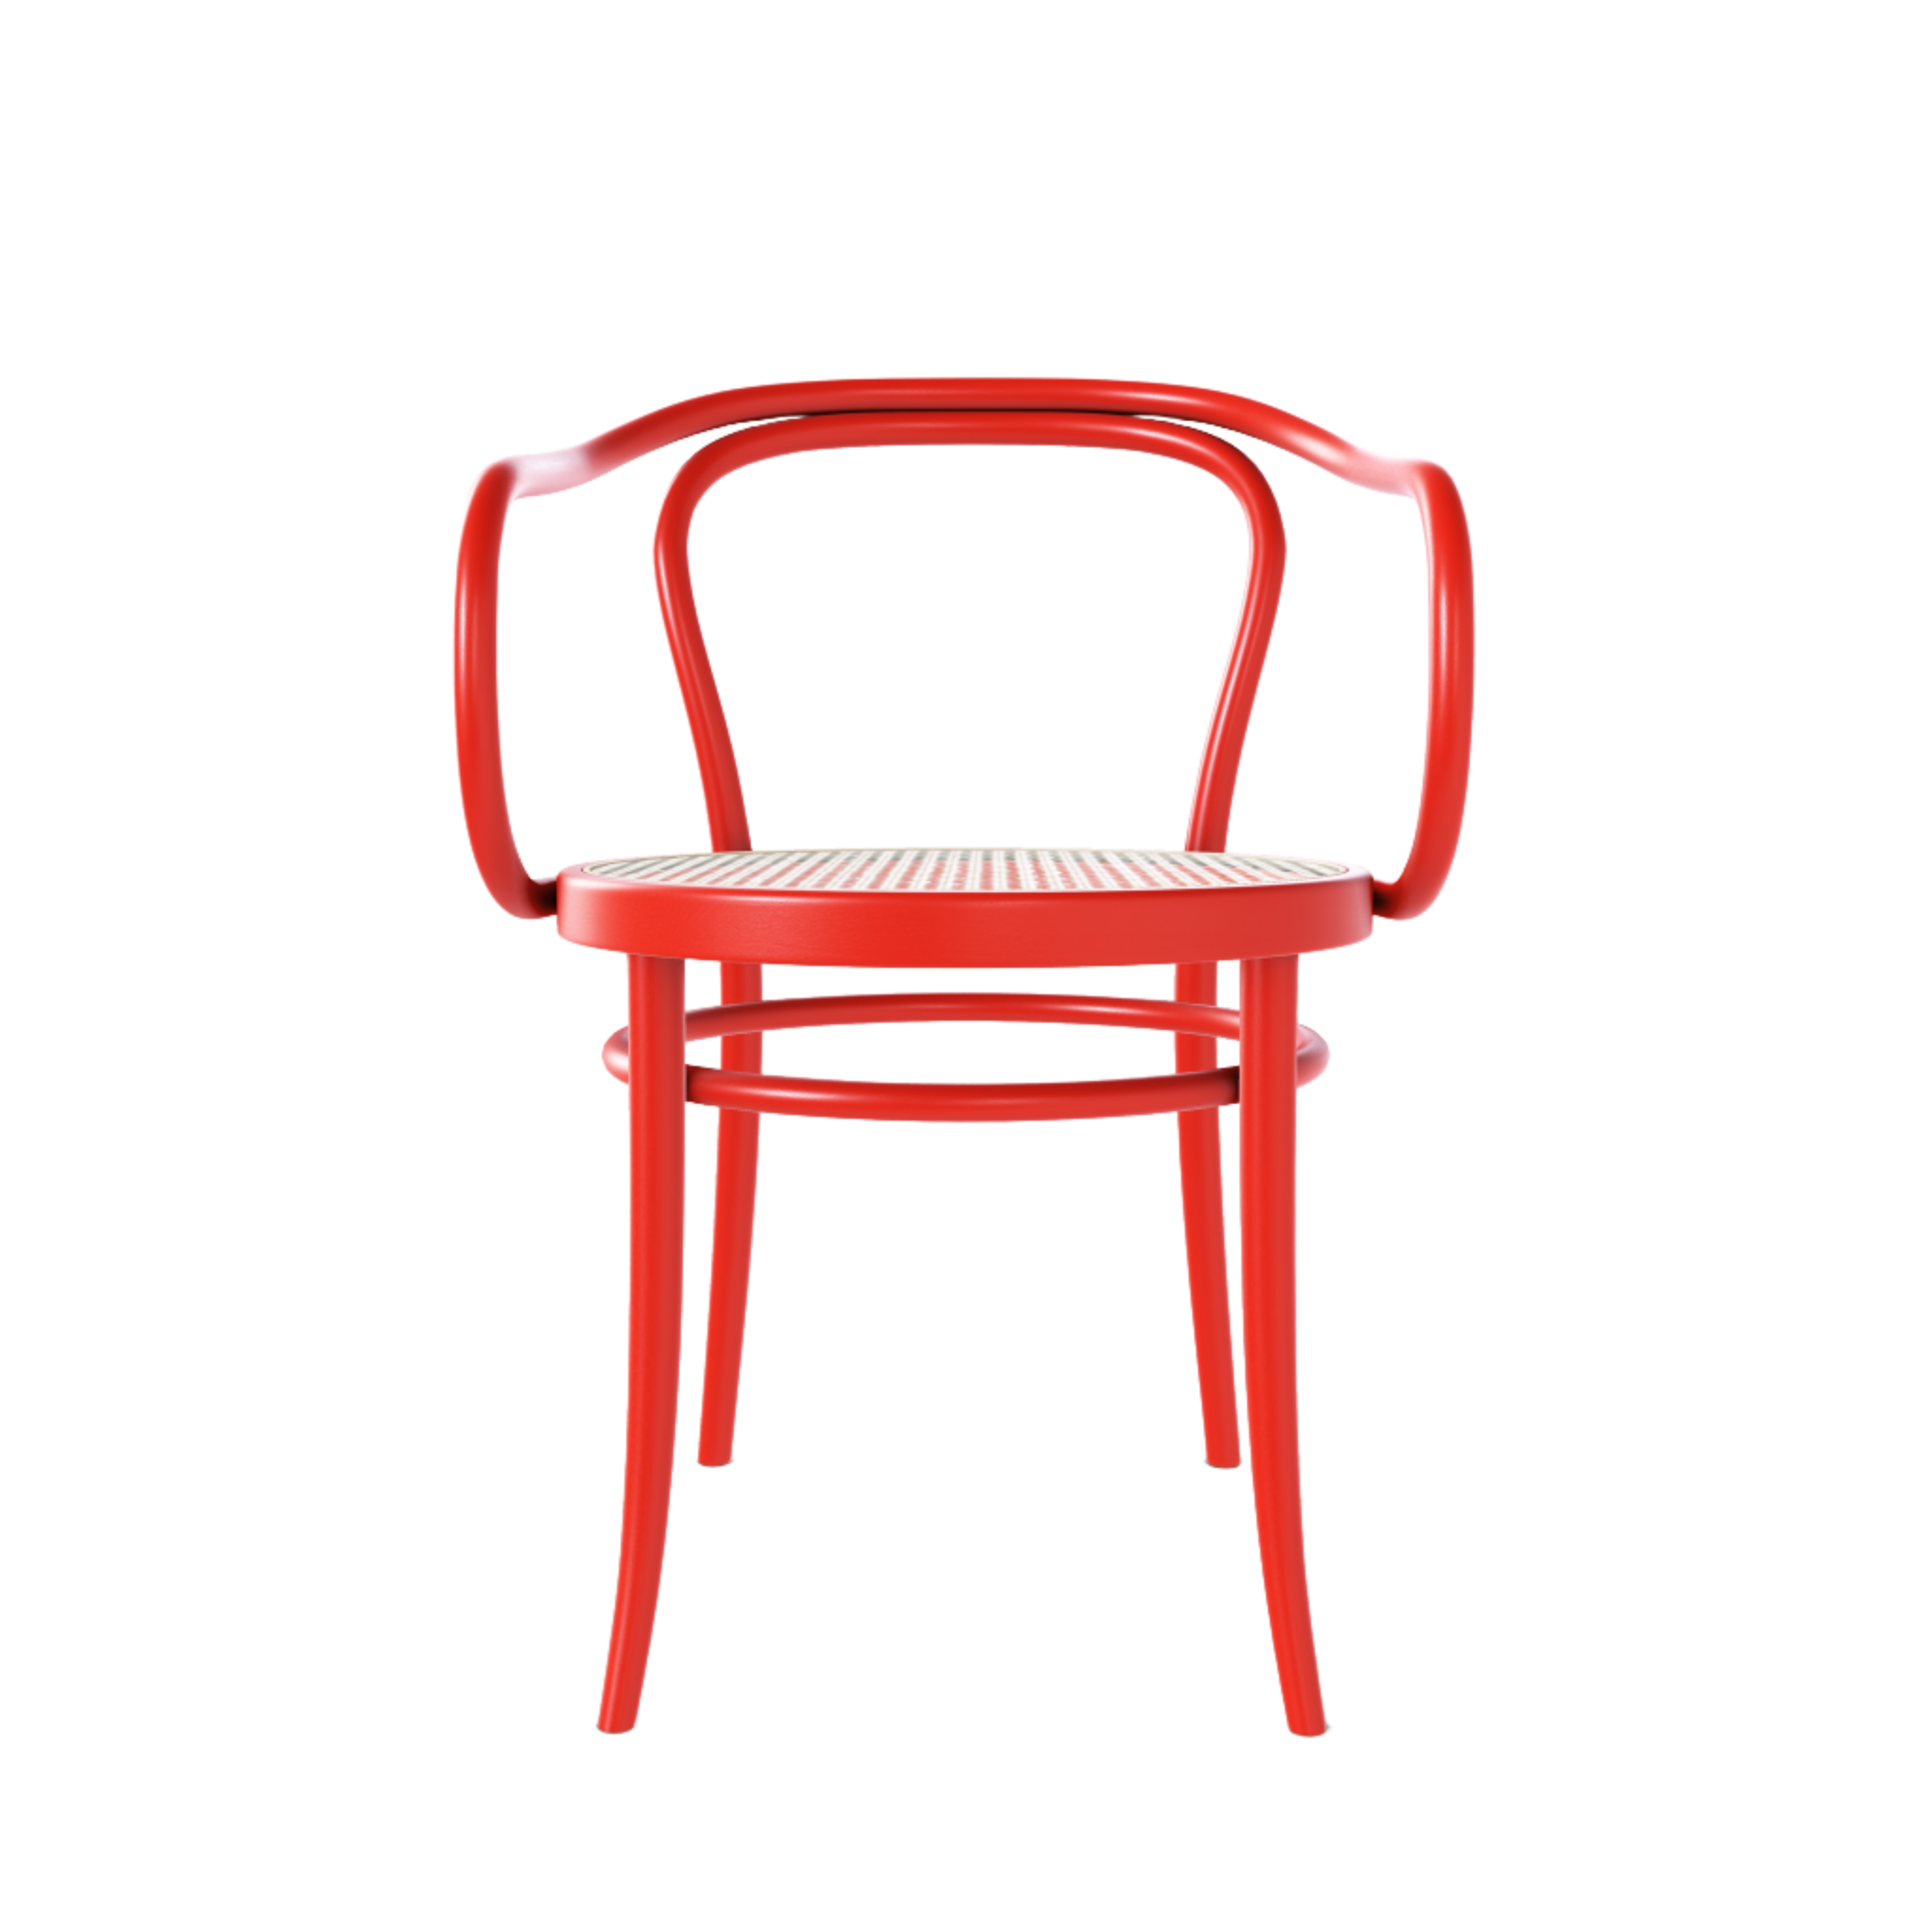 Ton 30 Armchair with cane seat in factory red